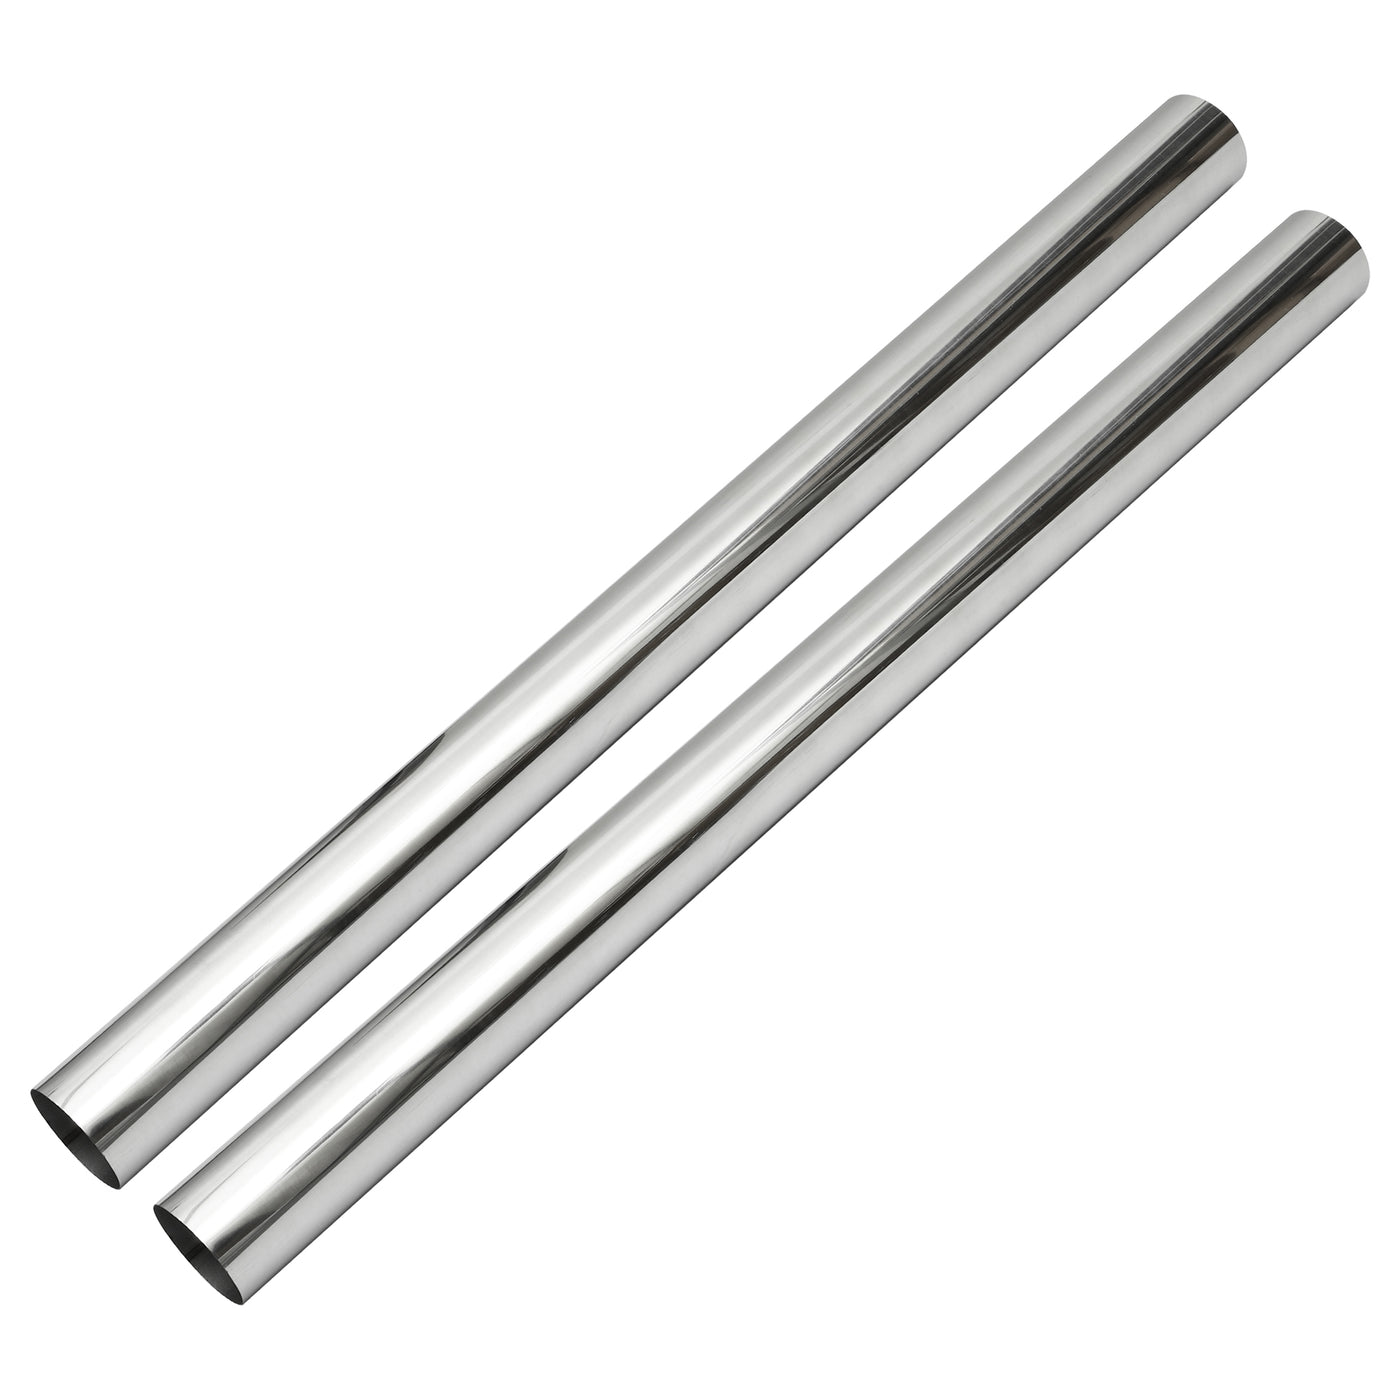 A ABSOPRO Car Mandrel Exhaust Pipe Tube Durable 48" Length 3.5'' OD Straight Exhaust Tube DIY Custom 0 Degree Modified Piping T304 Stainless Steel (Set of 2)